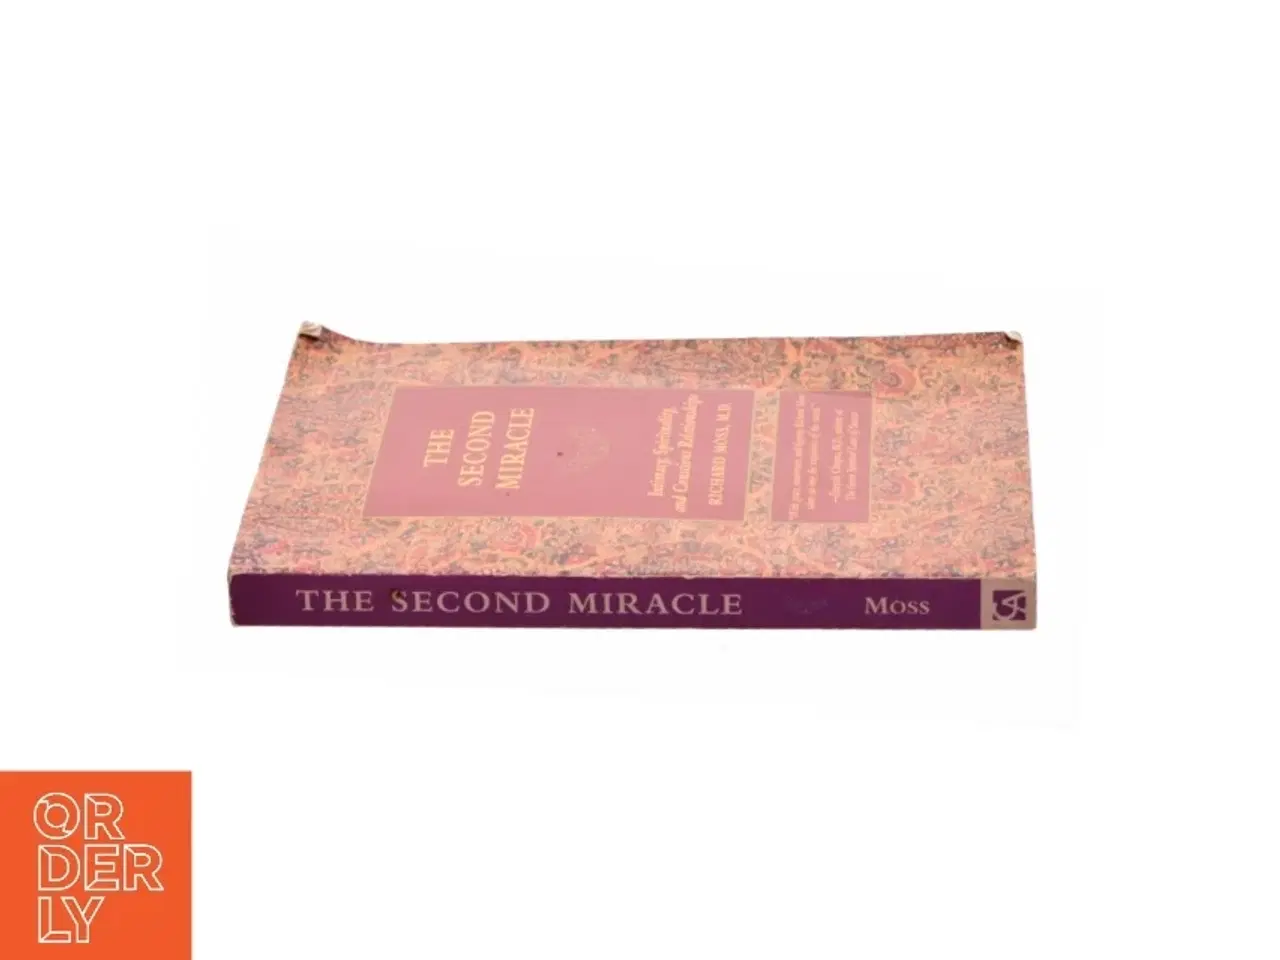 Billede 2 - The Second Miracle : Intimacy, Spirituality, and Conscious Relationships by Richard M. Moss af Richard M. Moss (Bog)